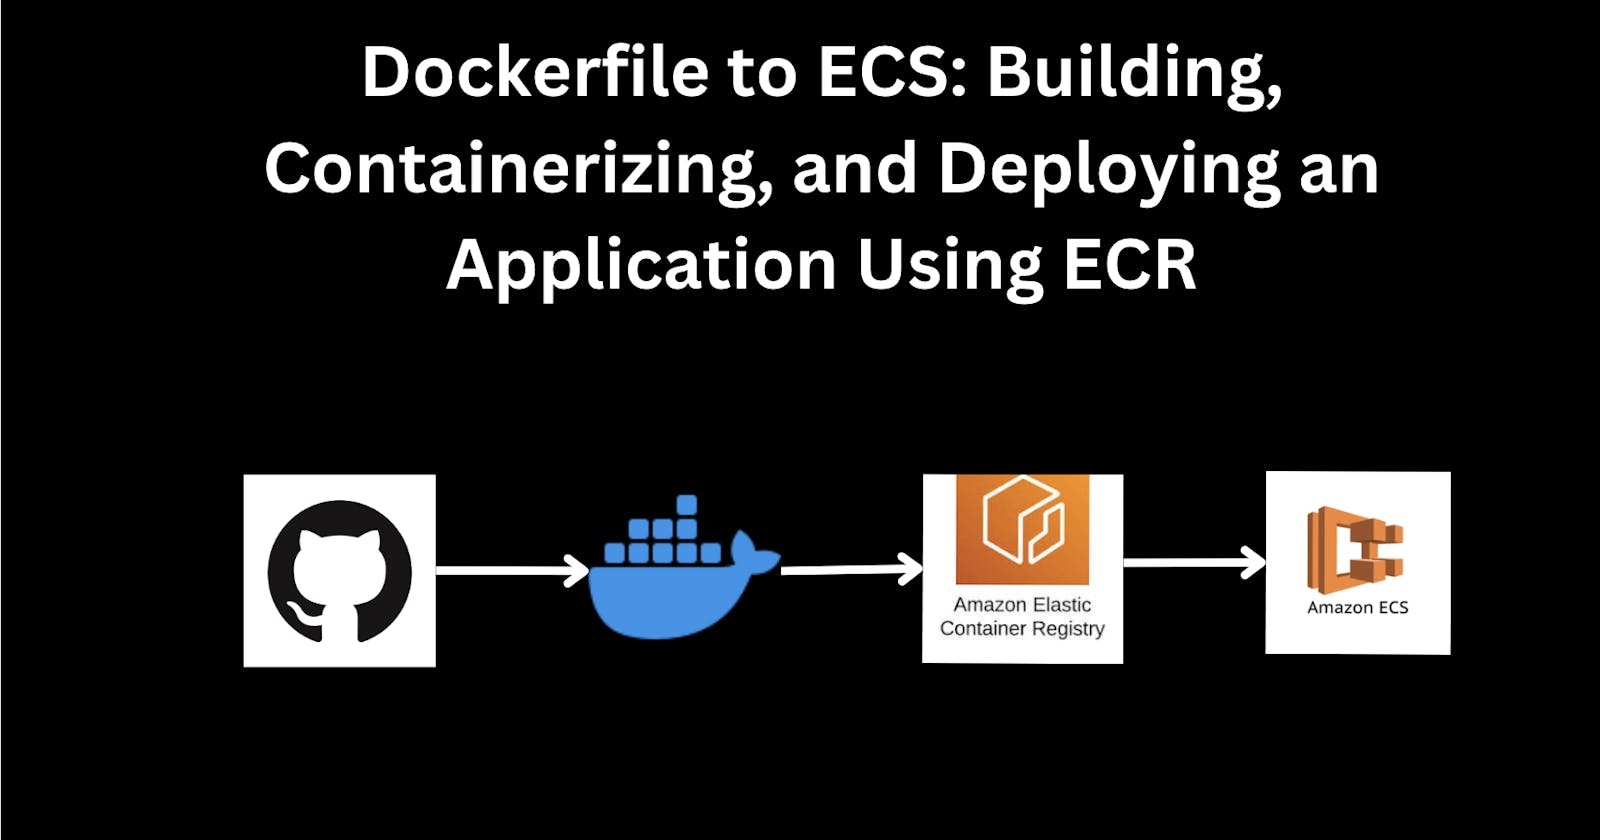 From Dockerfile to ECS: Building, Containerizing, and Deploying an Application Using ECR